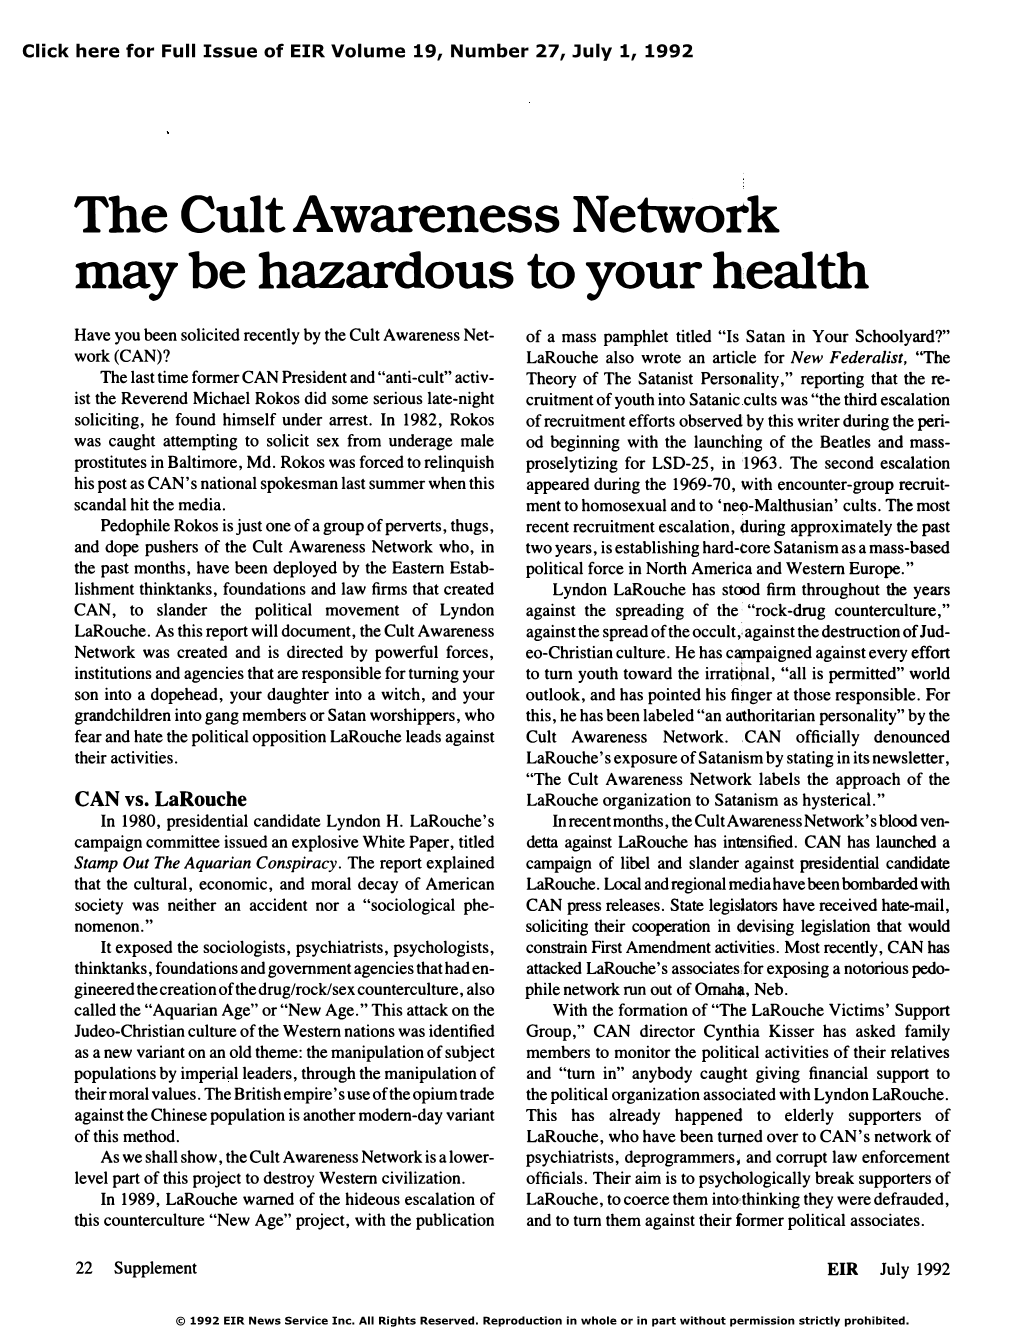 The Cult Awareness Network May Be Hazardous to Your Health